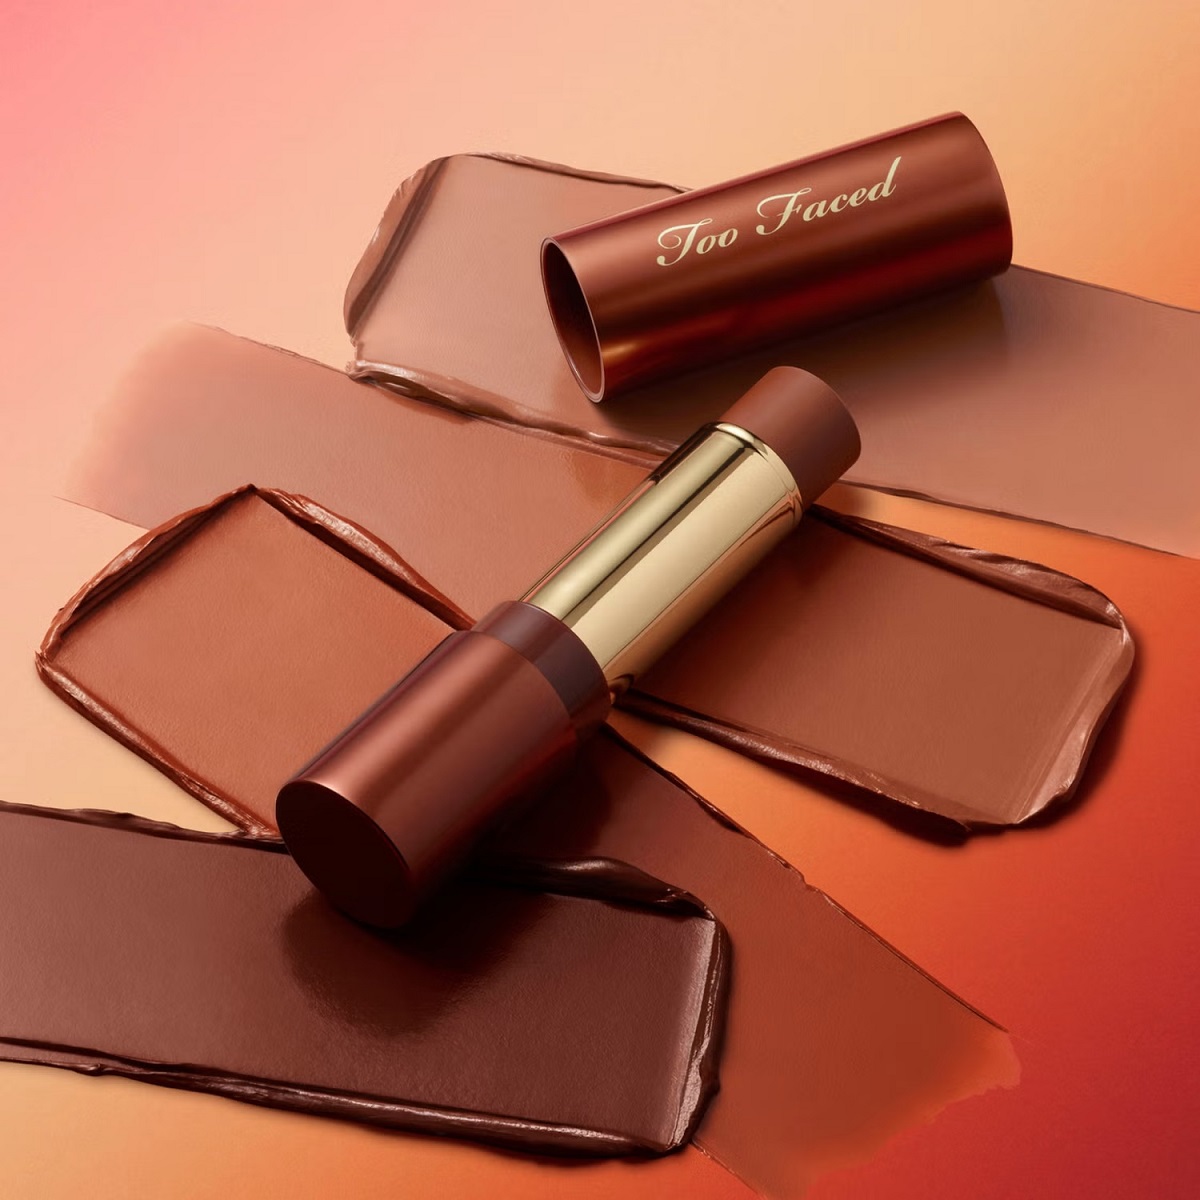 Too Faced Chocolate Soleil Melting Bronzing and Sculpting Stick